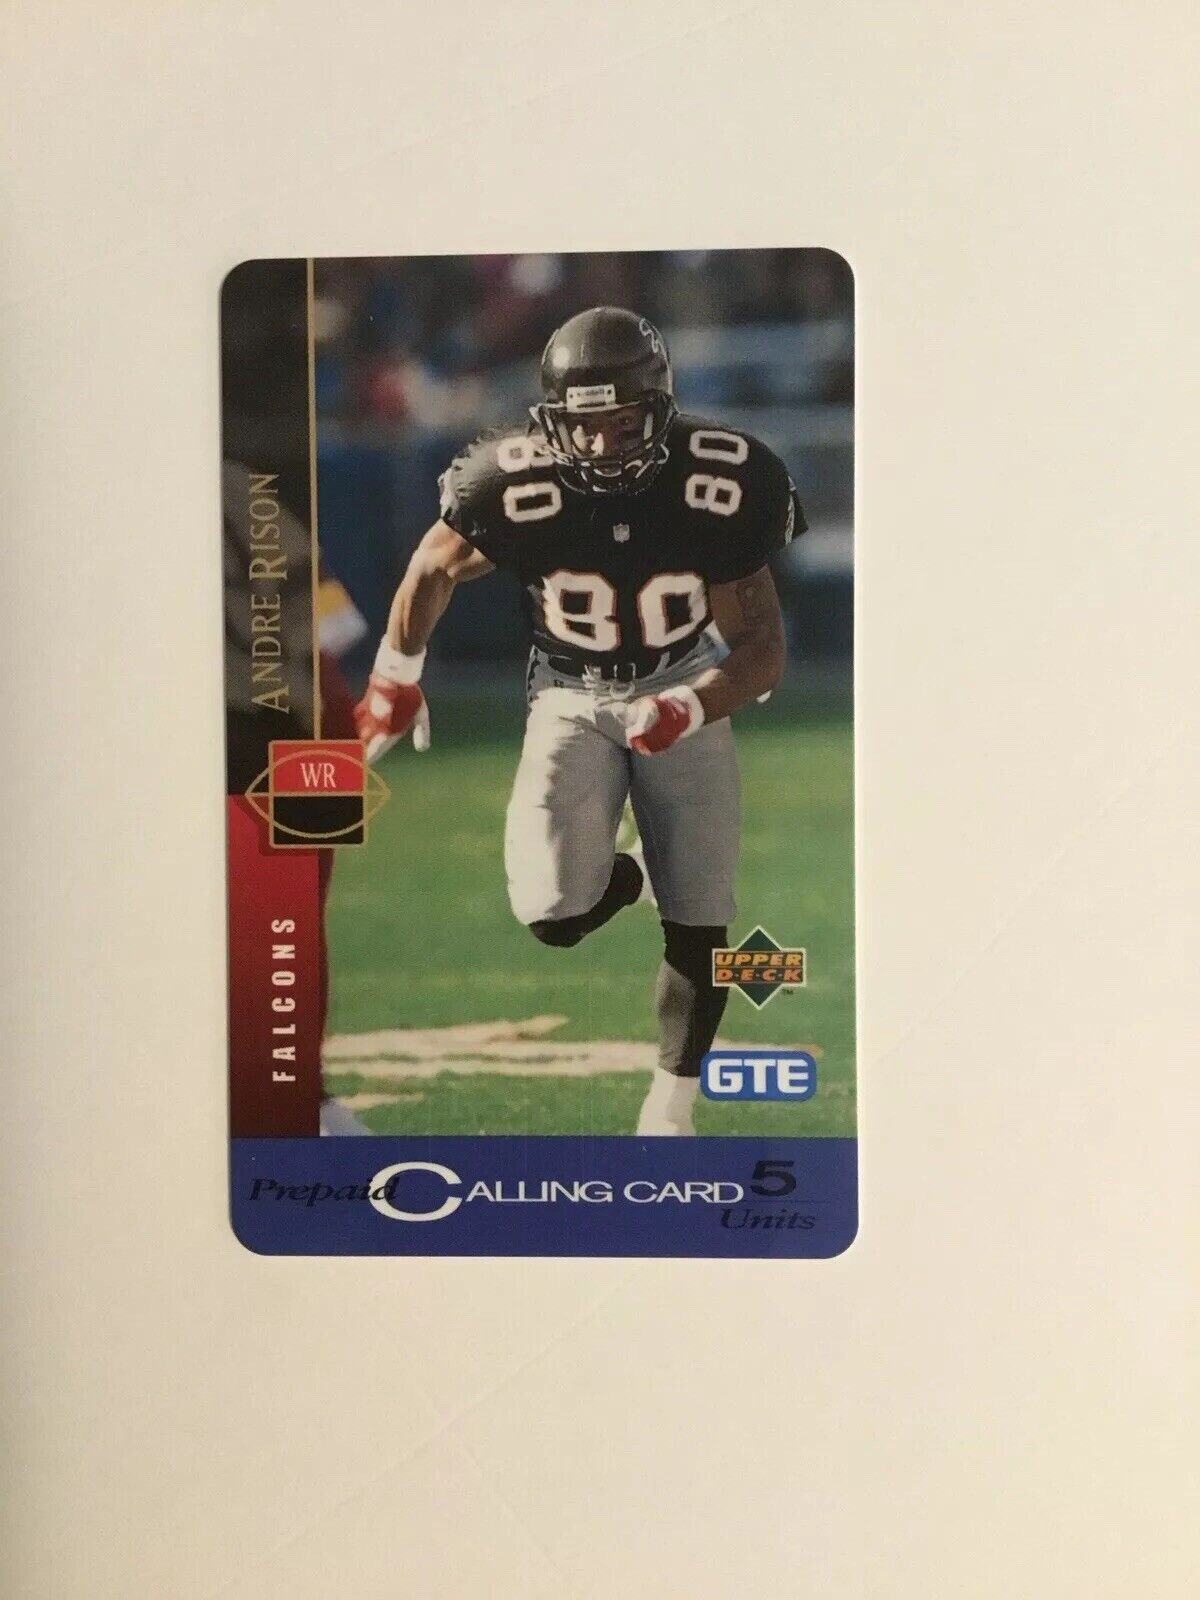 1994 Upper Deck NFC Phone Card Featuring Andre Rison GTE